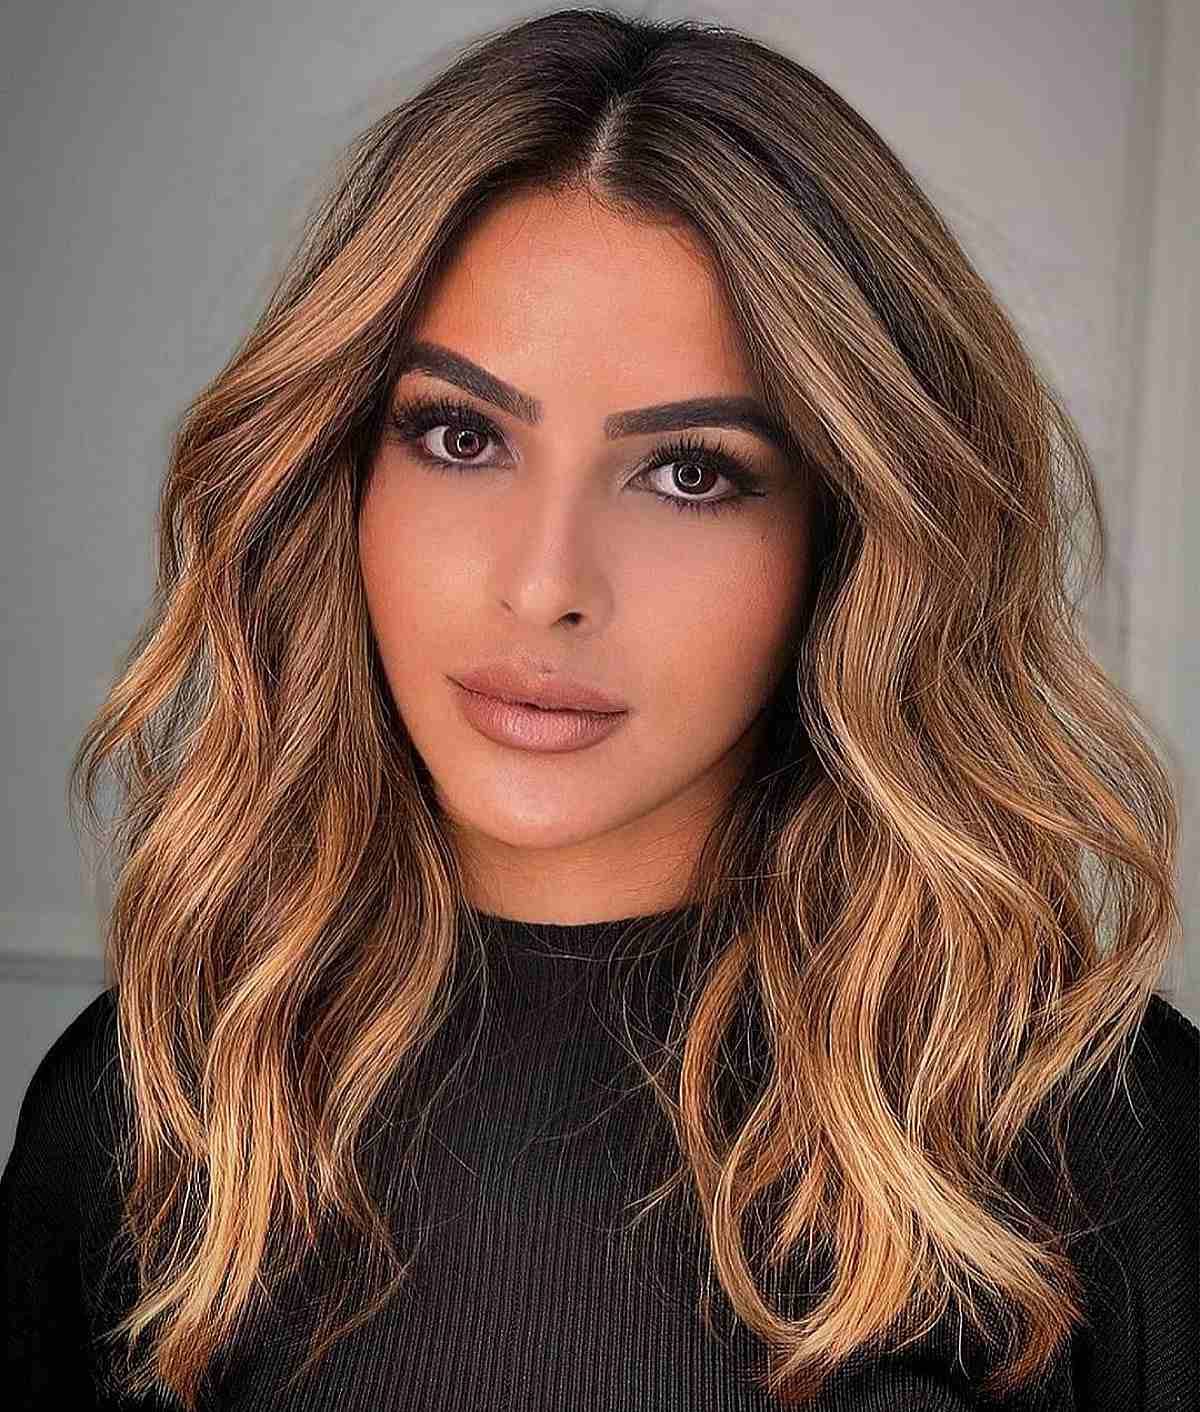 43 Flattering Middle Part Hairstyles Trending Right Now With Latest Wavy Medium Hairstyles With Middle Part (View 4 of 25)